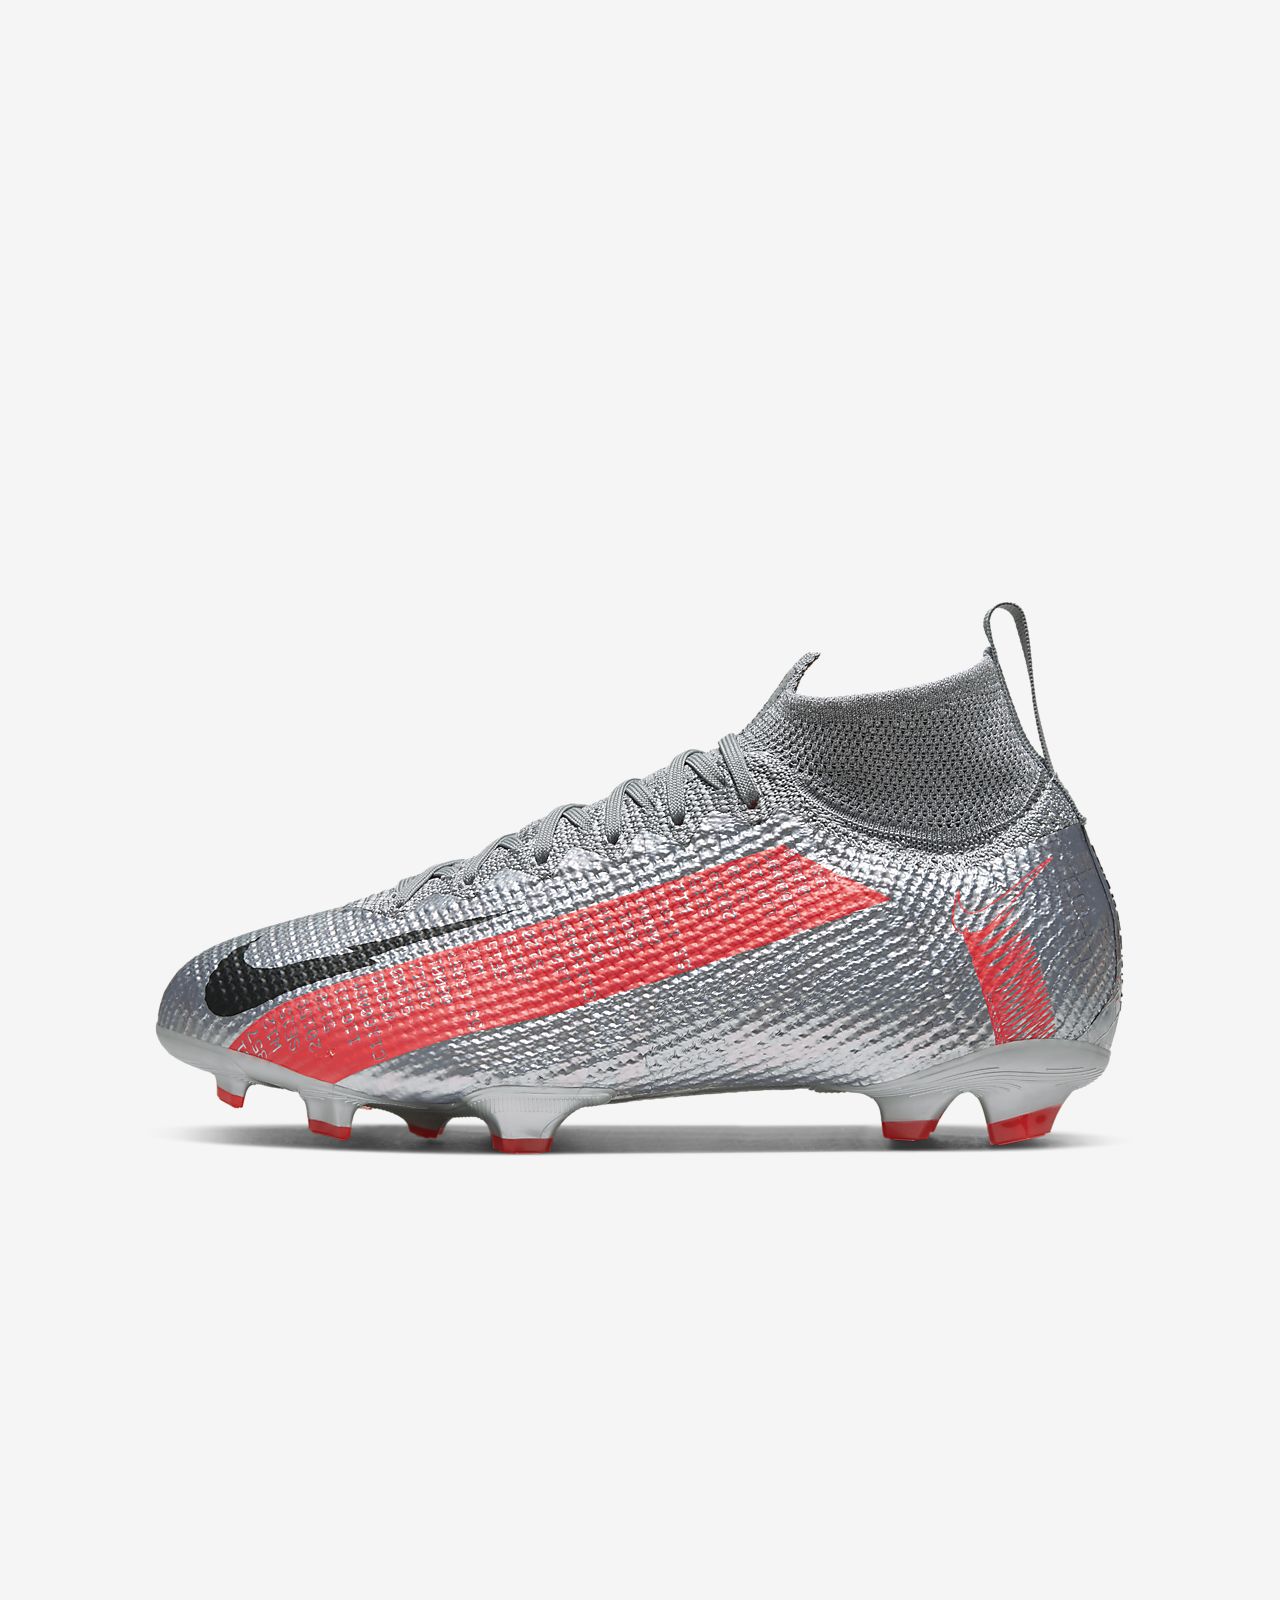 Nike Mercurial Superfly 7 Elite AG PRO Under The.